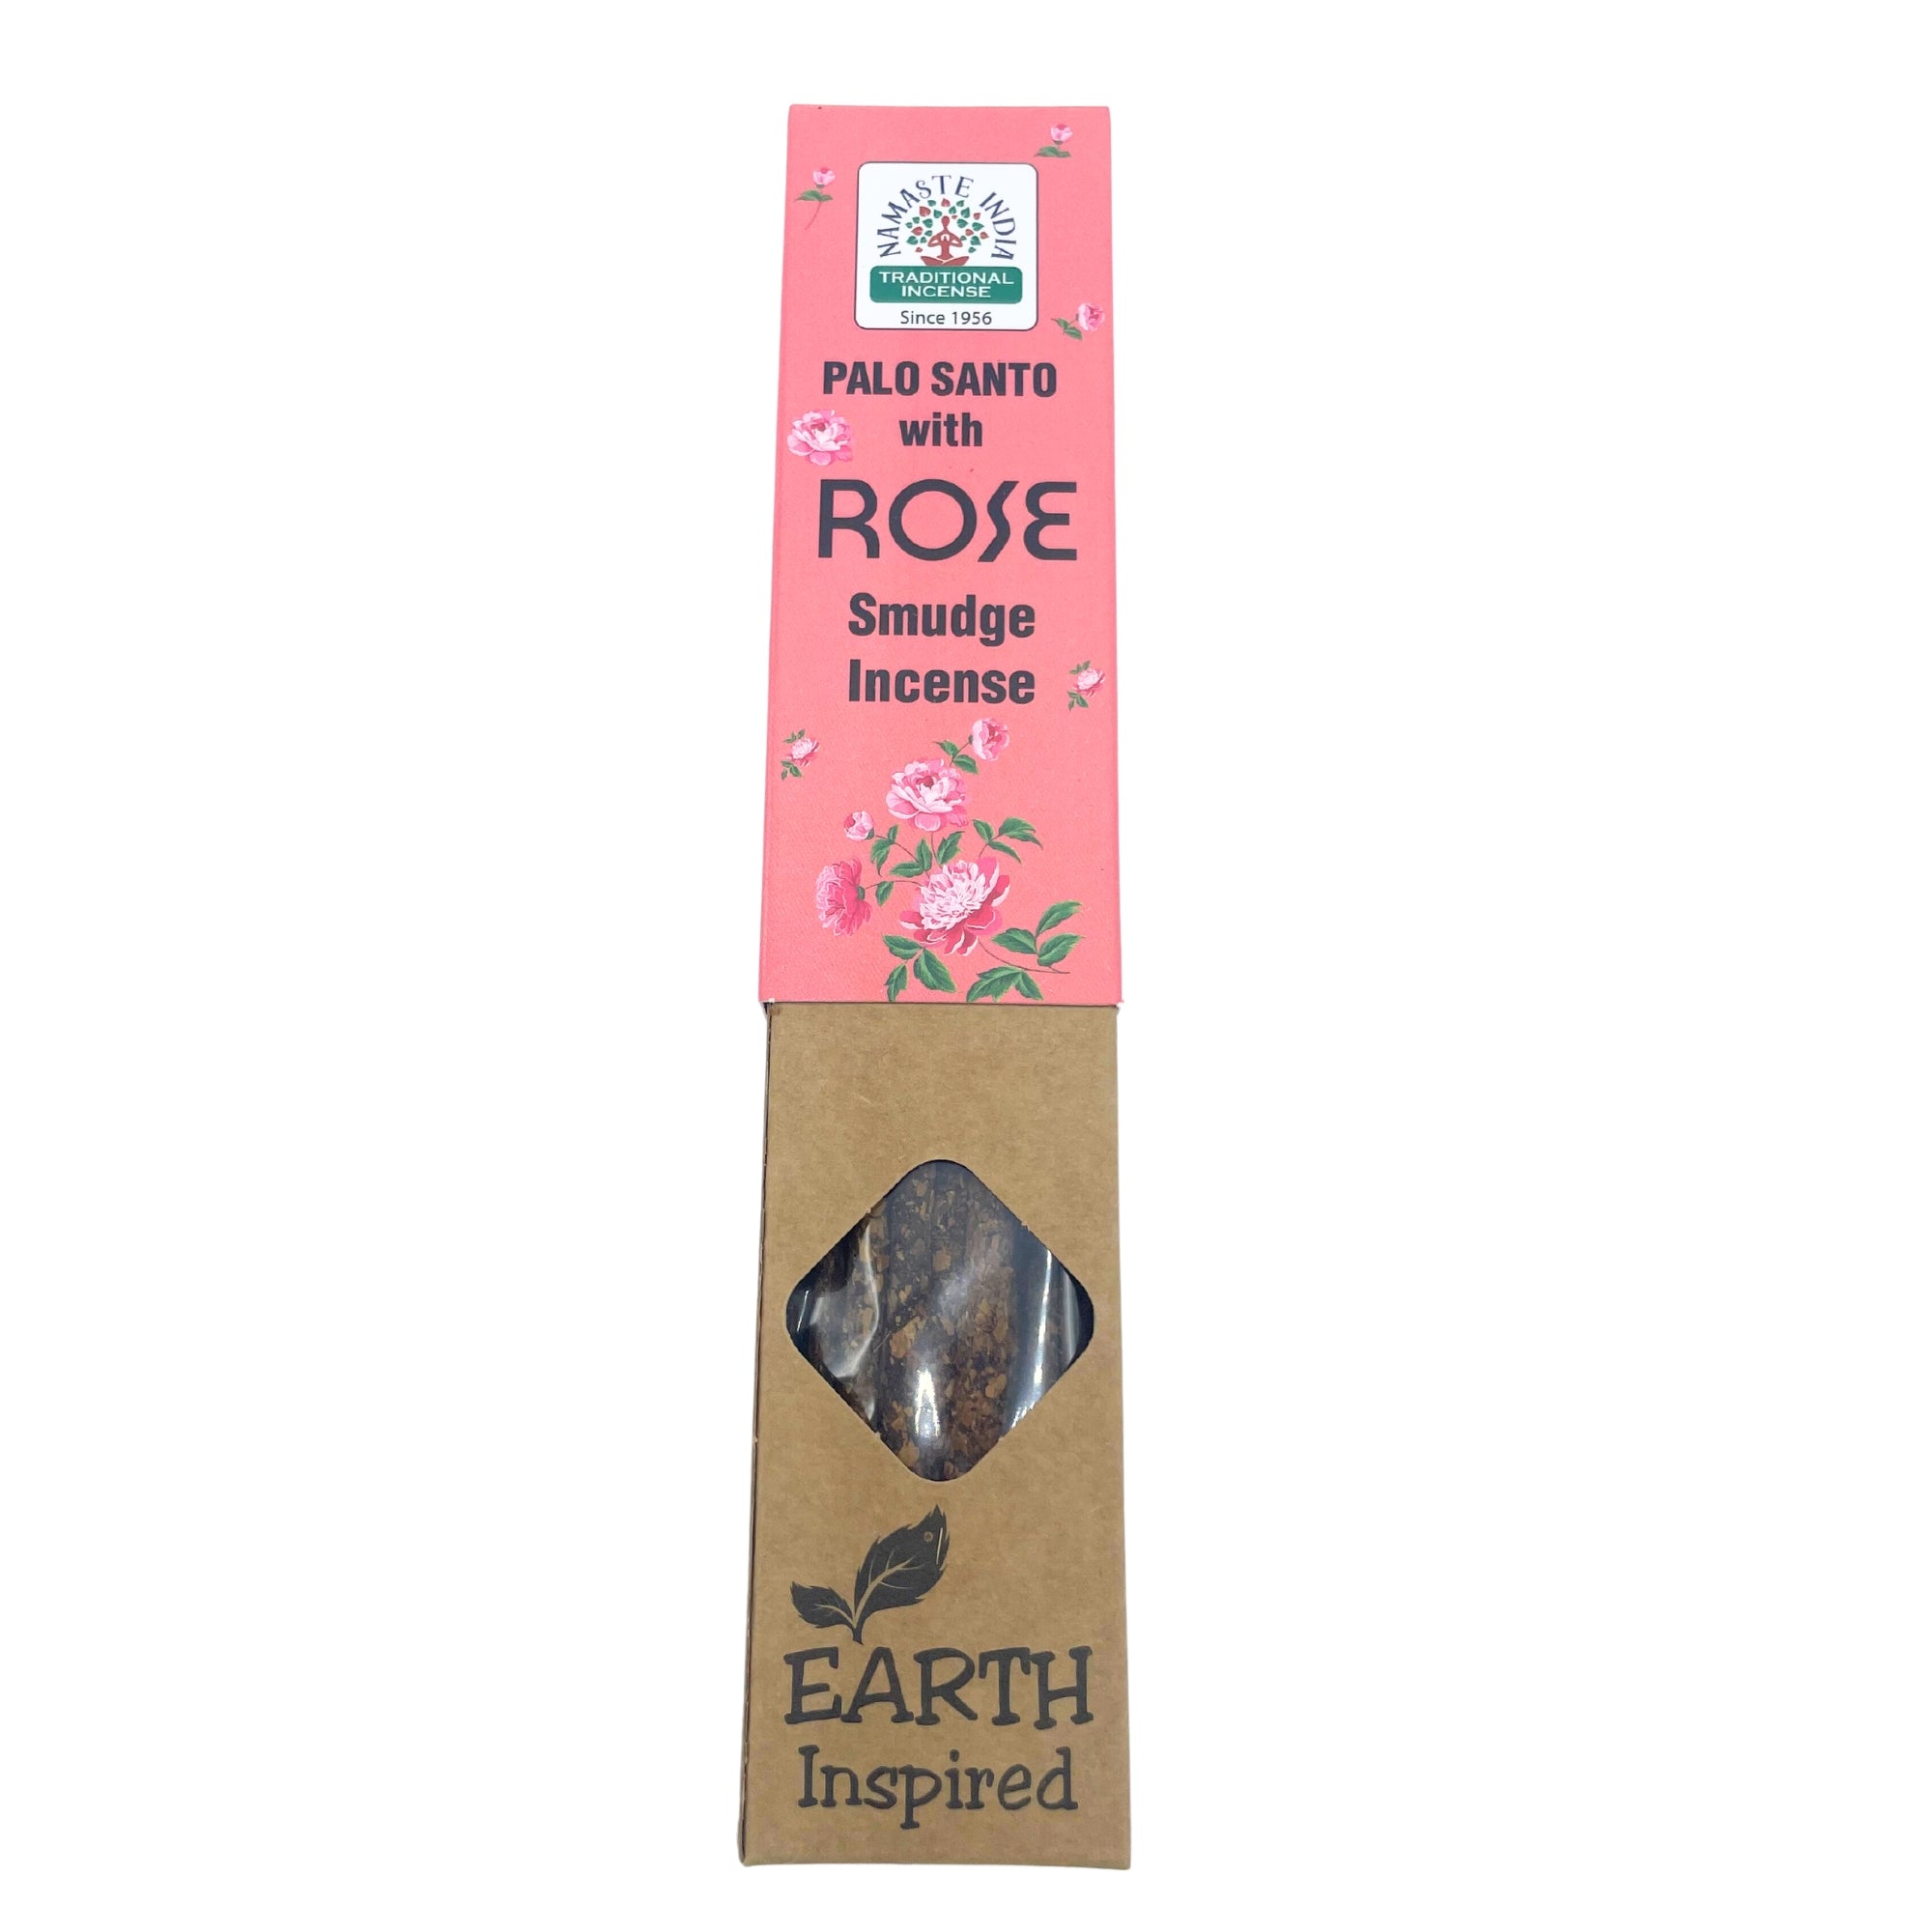 View Earth Inspired Smudge Incense Rose information